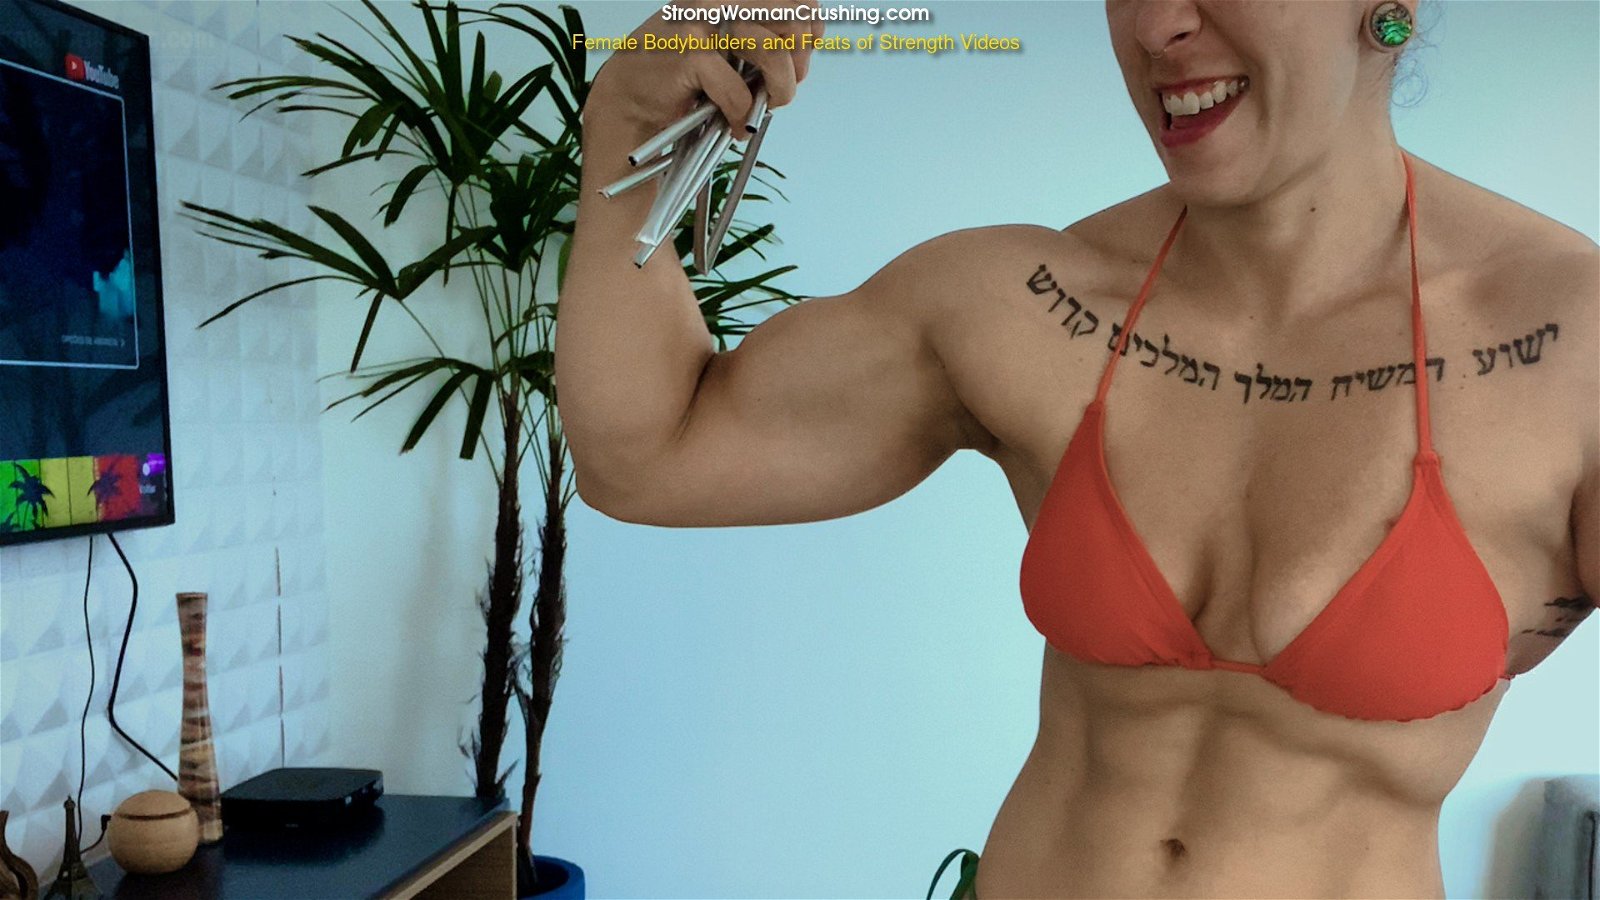 Photo by MusclegirlStrength with the username @MusclegirlStrength, who is a brand user,  April 15, 2024 at 11:16 PM and the text says 'Muscular Sassenach Destroys Shoe Rack with Insane Strength!: StrongWomanCrushing.com

#musclegirl #musclegirllove #femalemuscle #femalemuscles #featsofstrength #MuscleQueen #PowerfulWomen #StrengthIsBeauty'